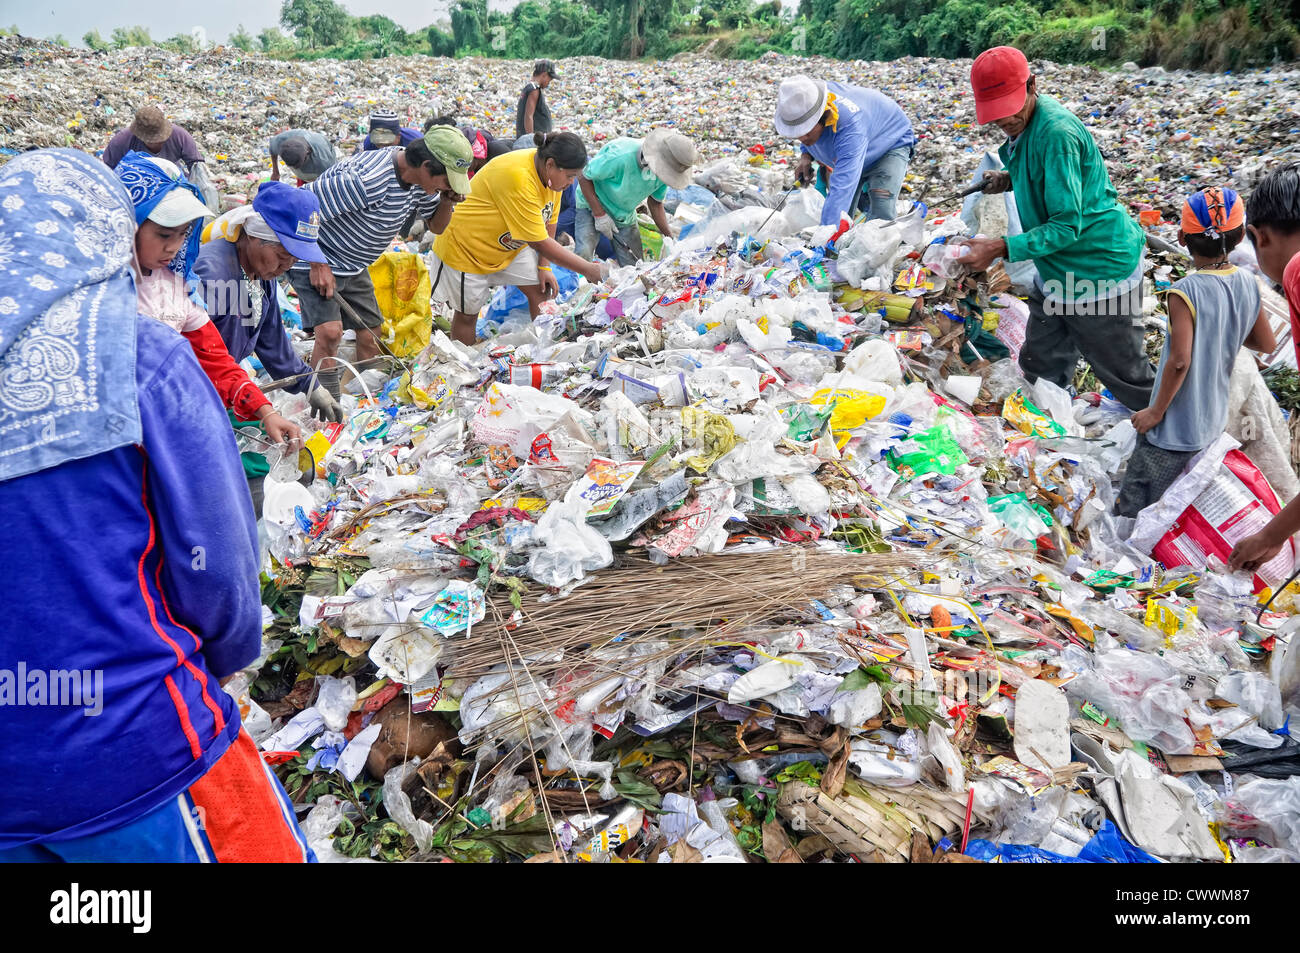 CAVITE, PHILIPPINESS. - FEBRUARY 12: Unidentified scavengers rummage for recyclable items in the Philippines Stock Photo